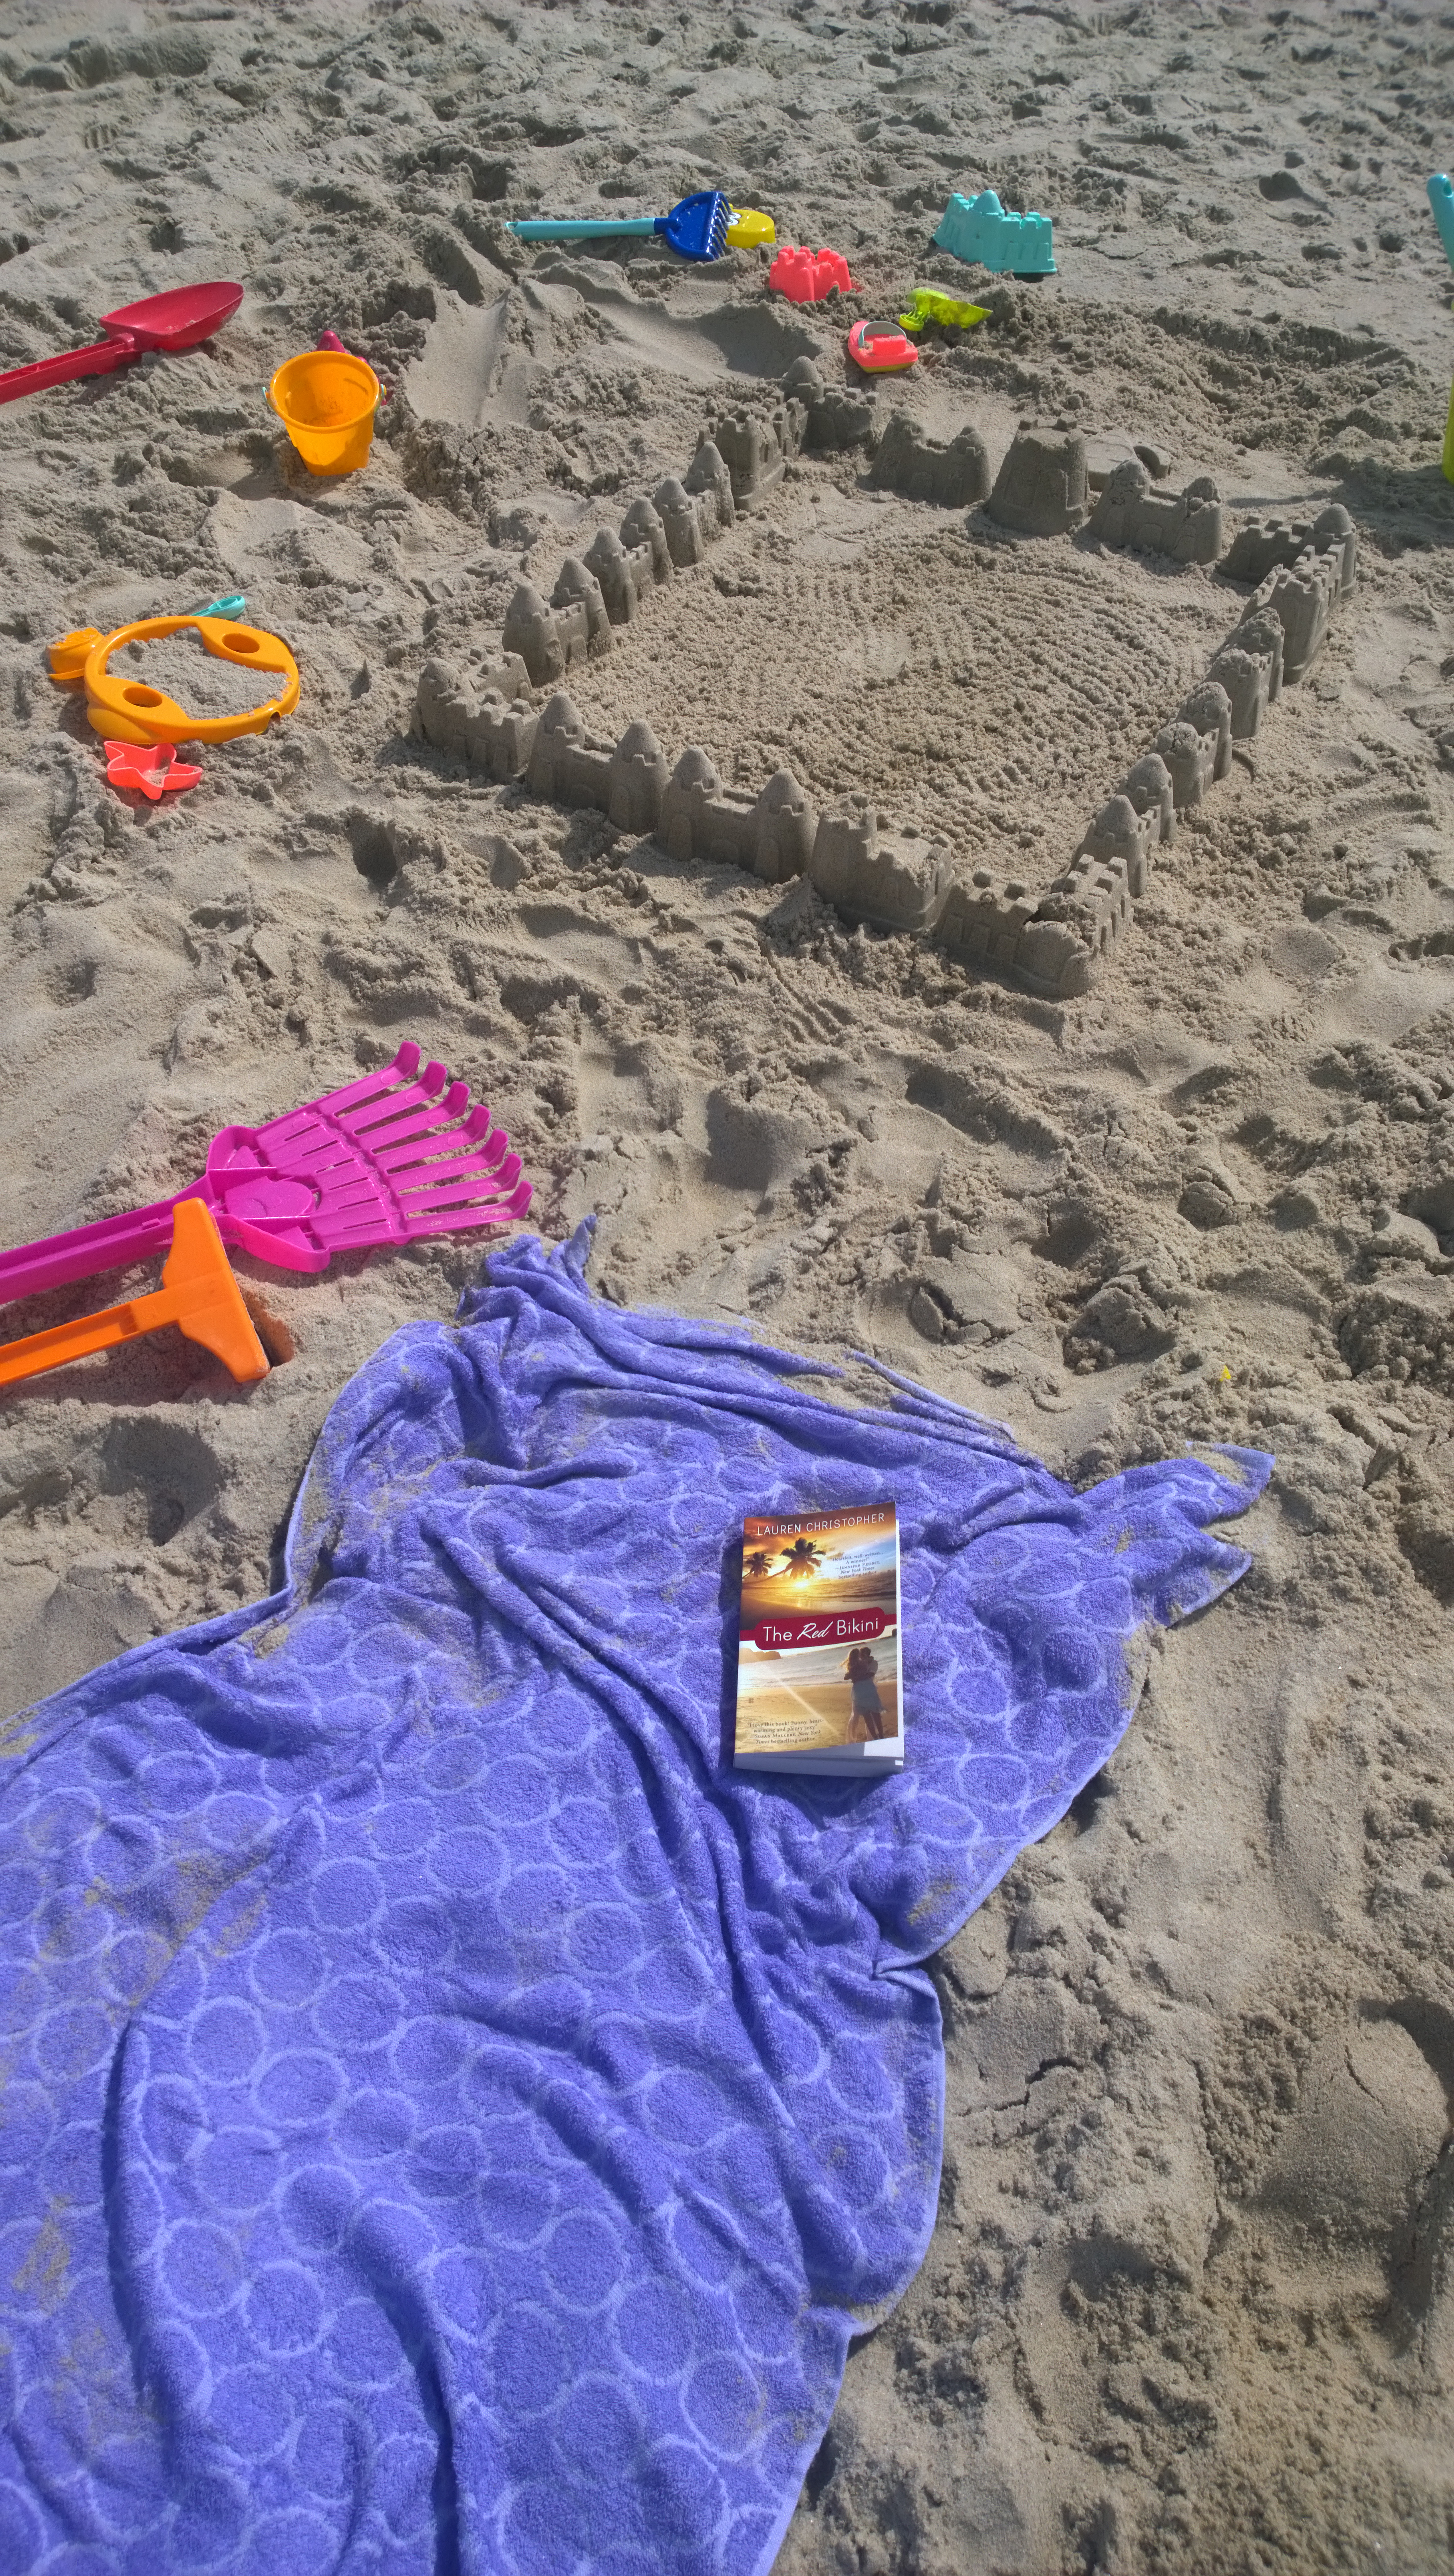 Debby B. With Her Kids At The Beach: She Reads While They Play!